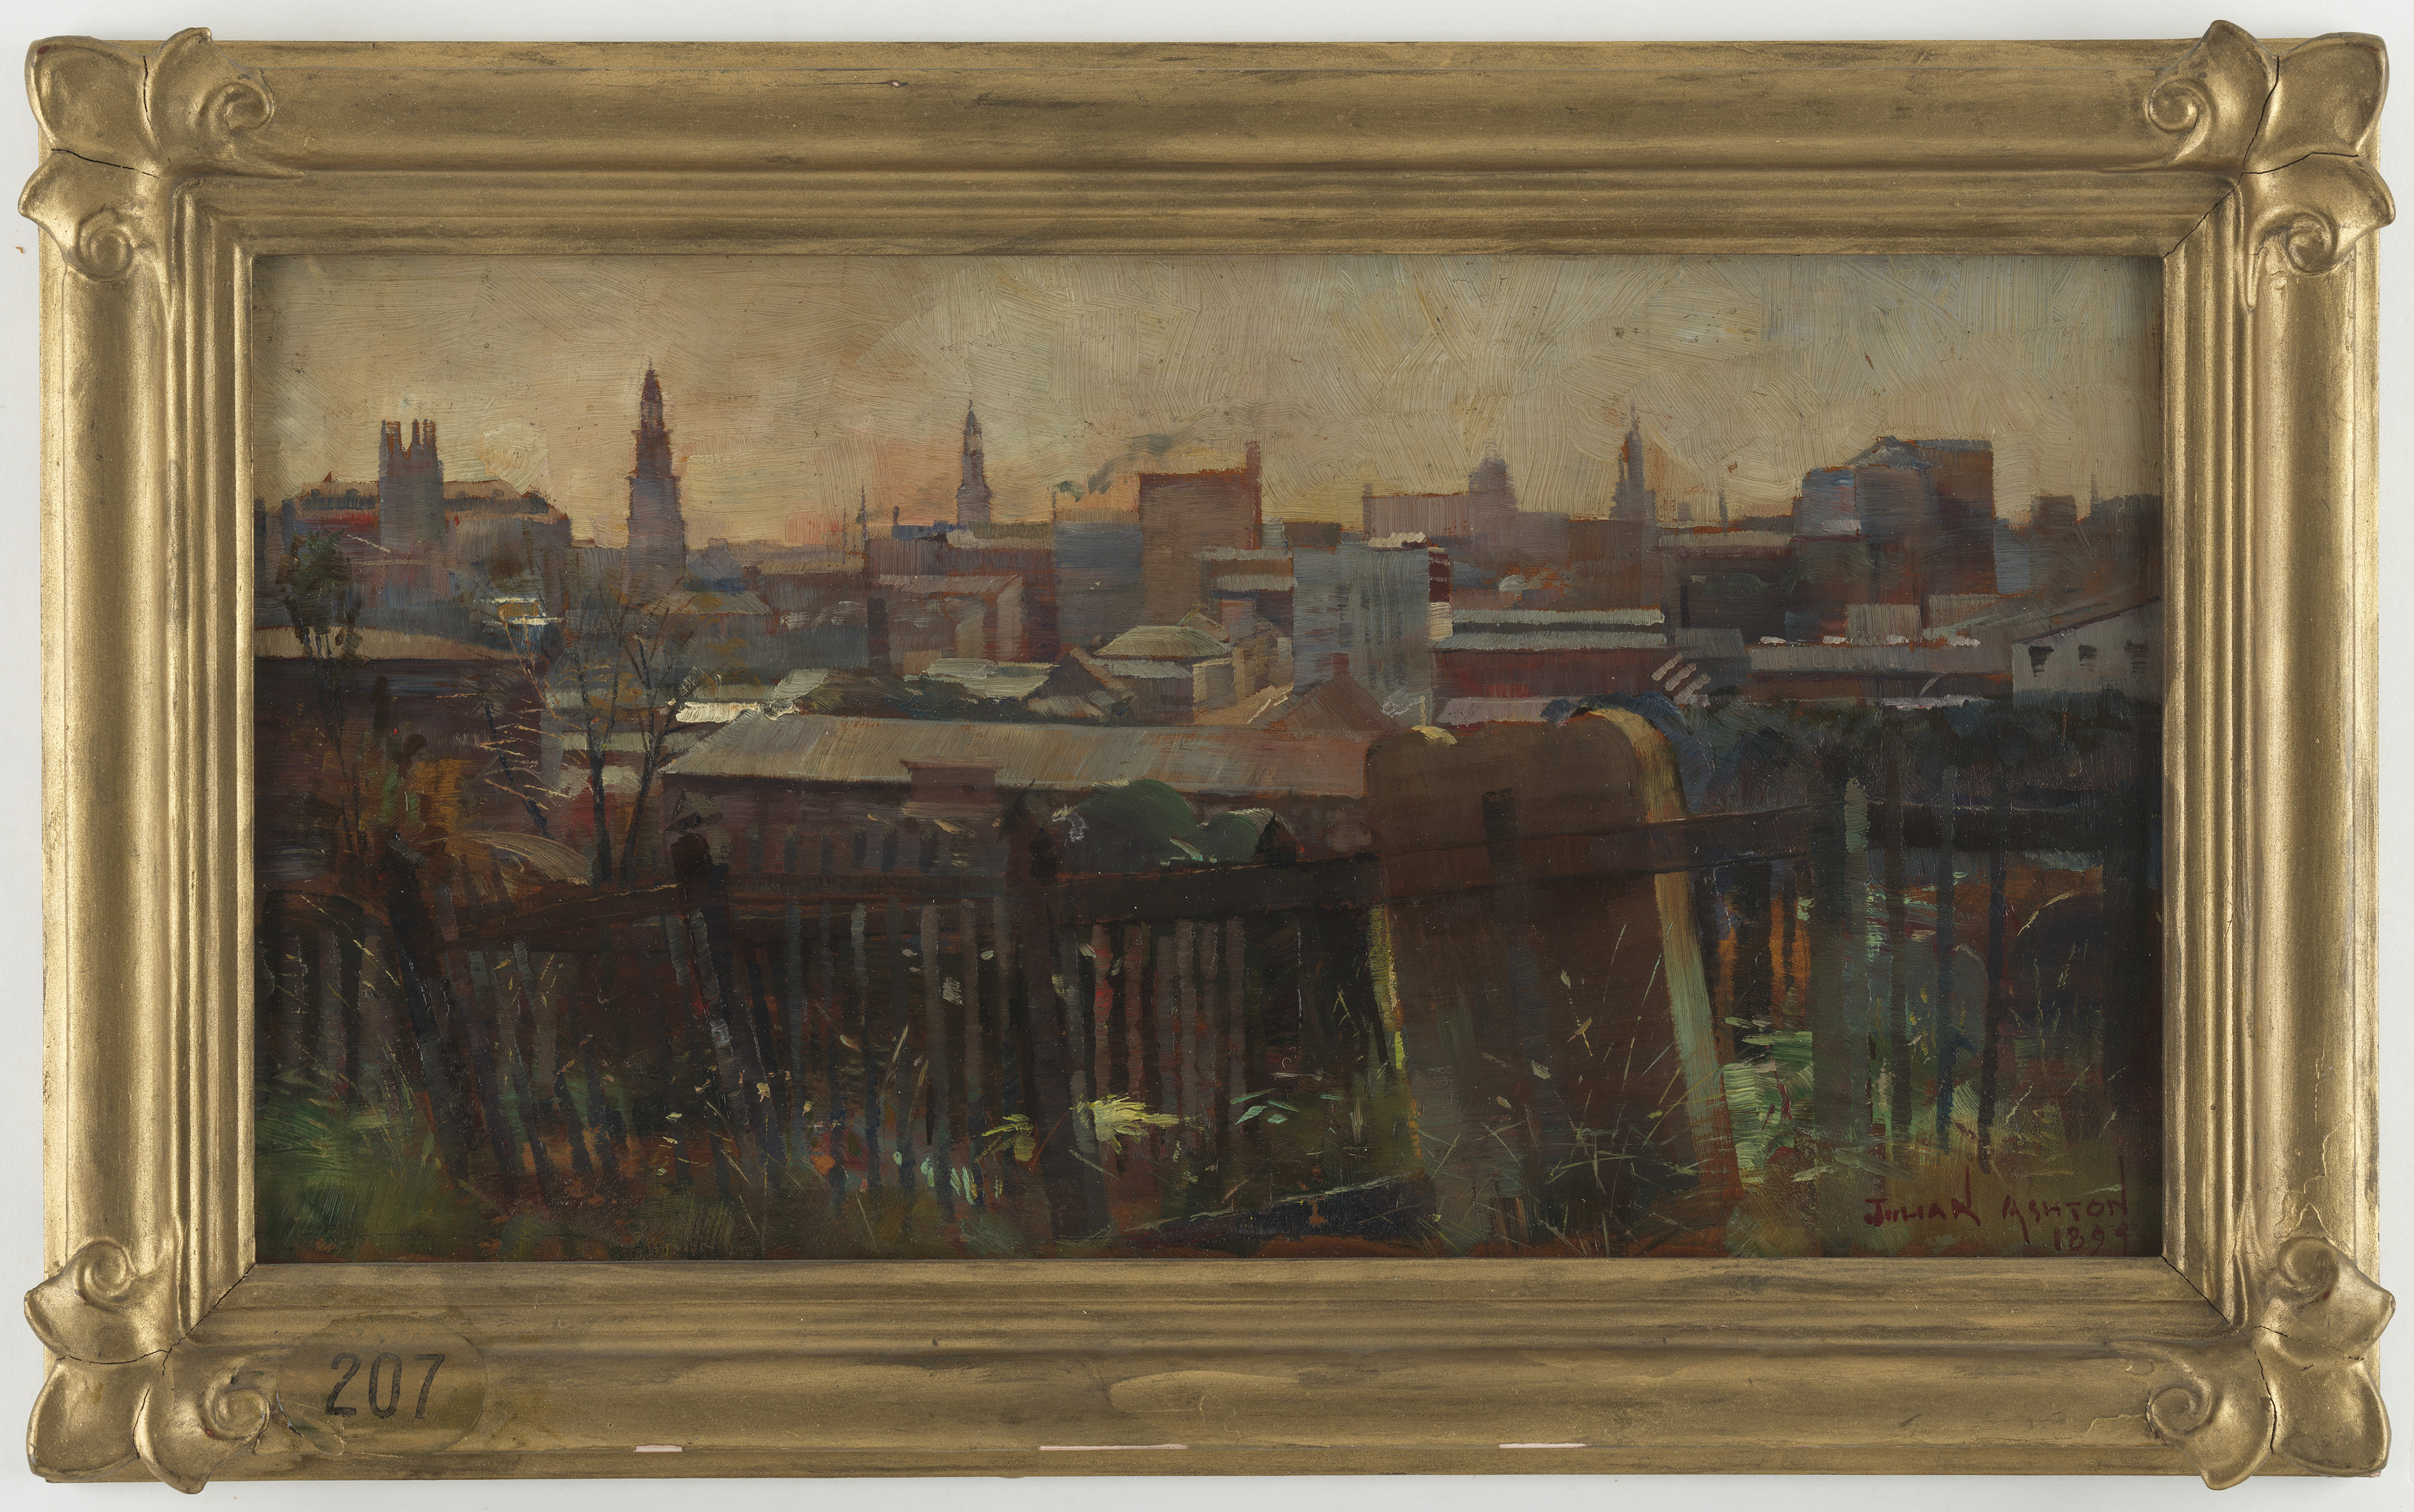 Framed oil painting of gravestones in a cemetery. A city can be seen the background.